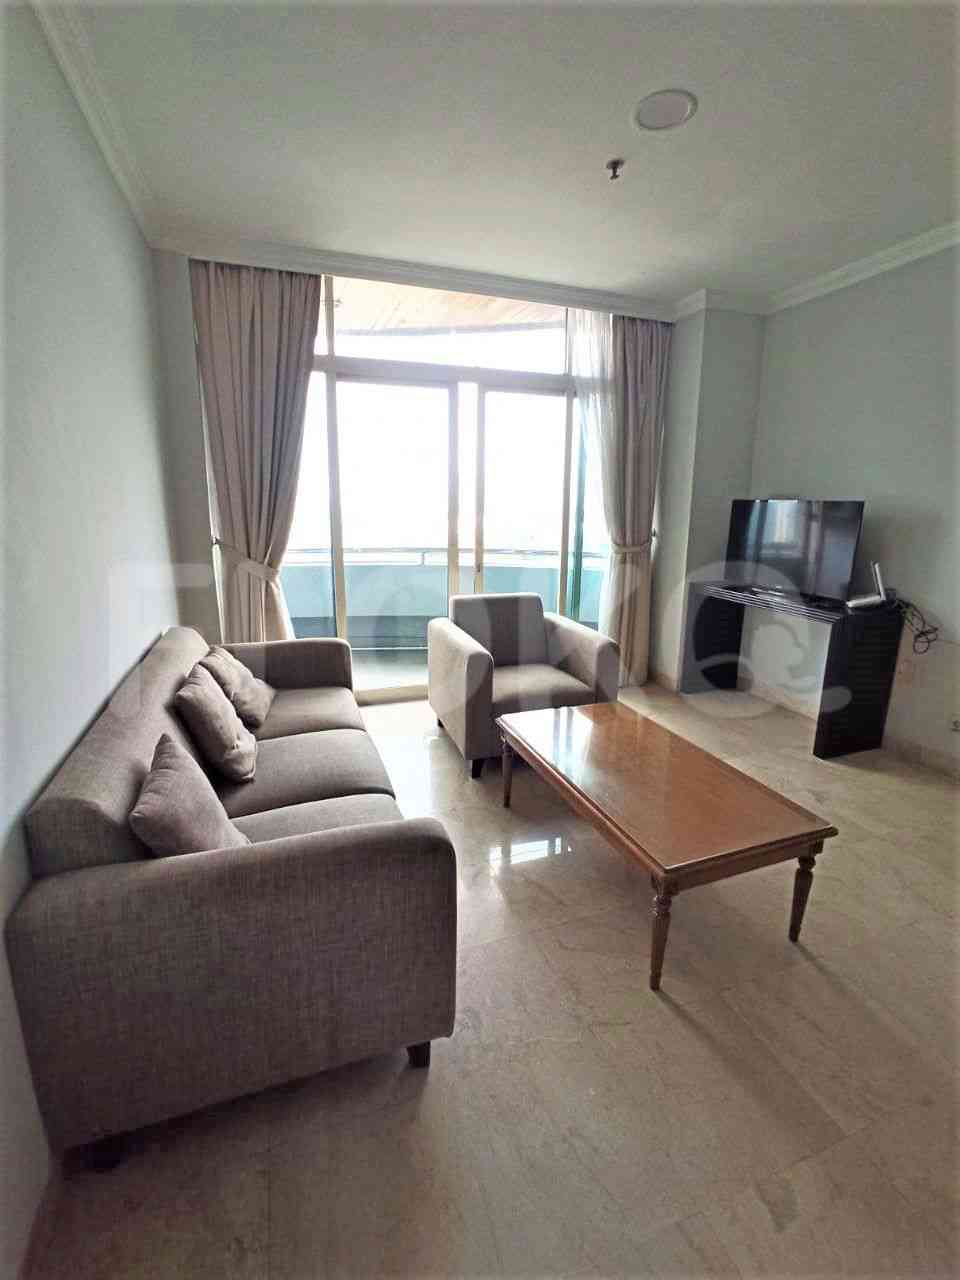 2 Bedroom on 15th Floor for Rent in Parama Apartment - ftb42a 1